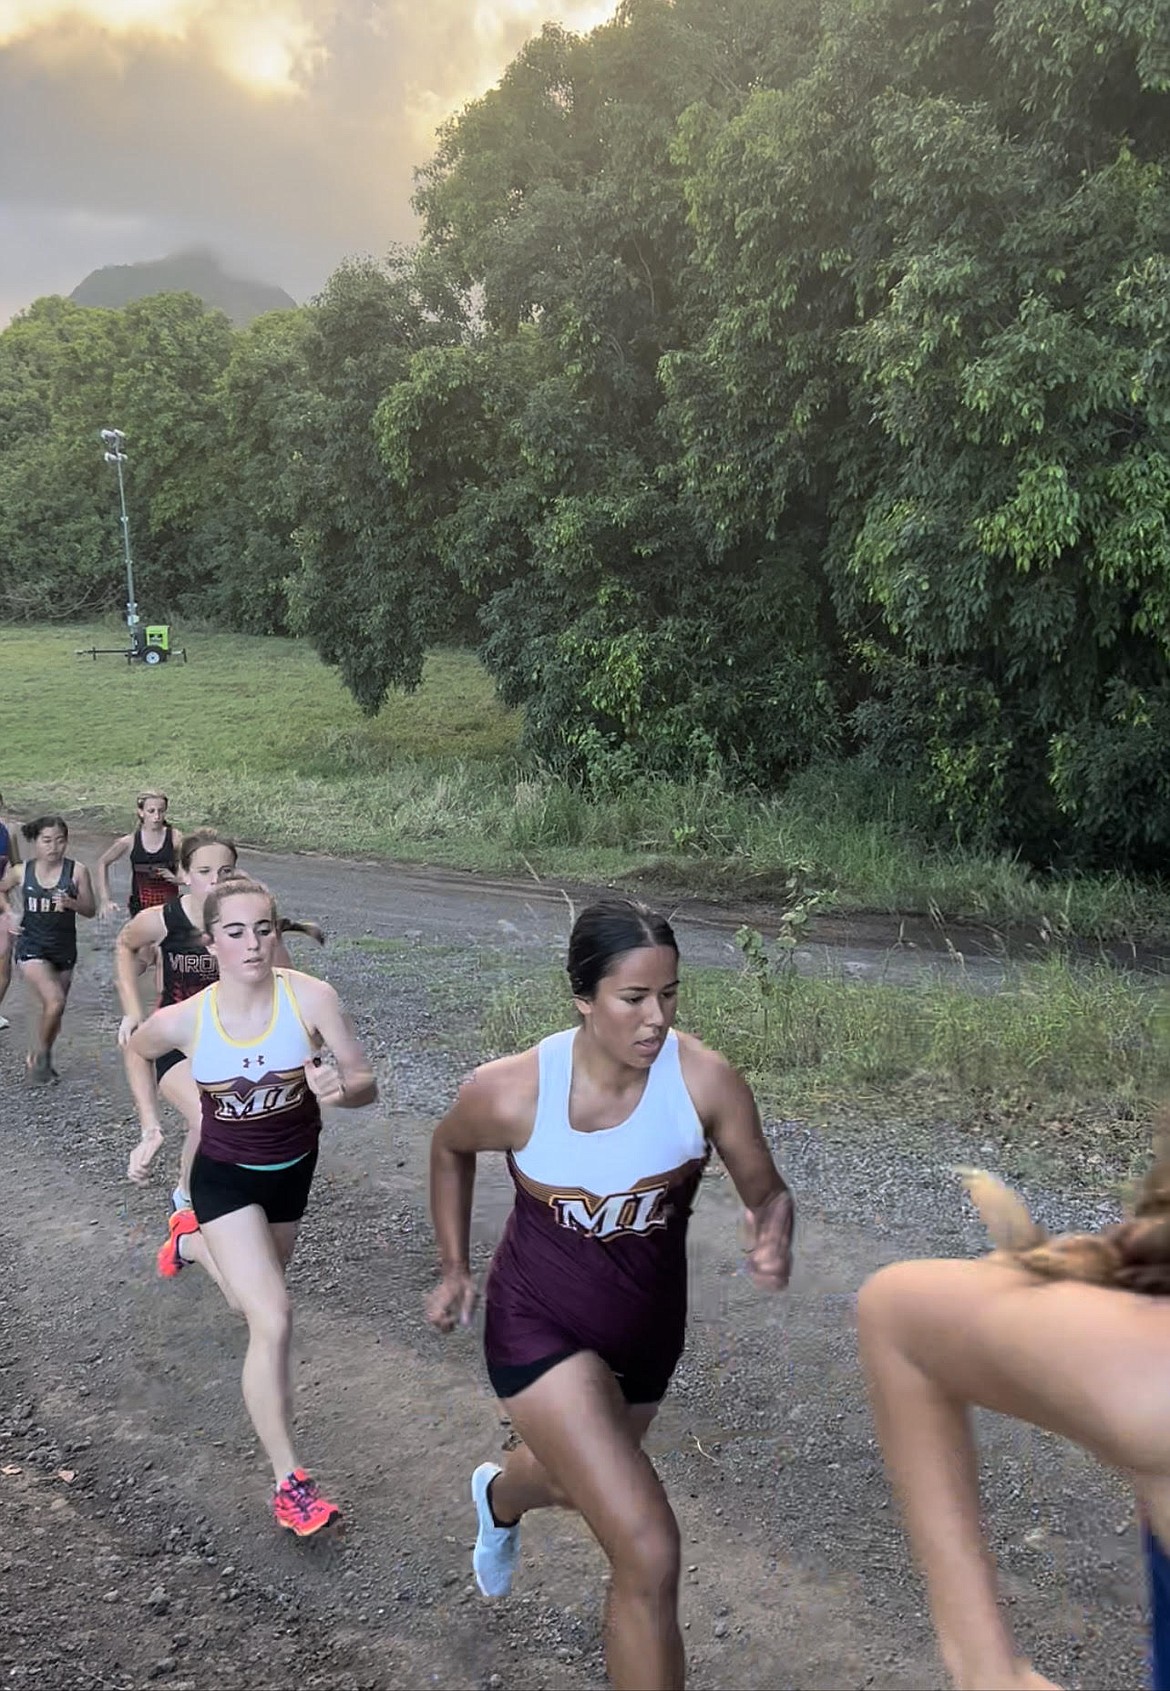 Moses Lake runners maintain pace at the Iolani Cross Country Invitational.